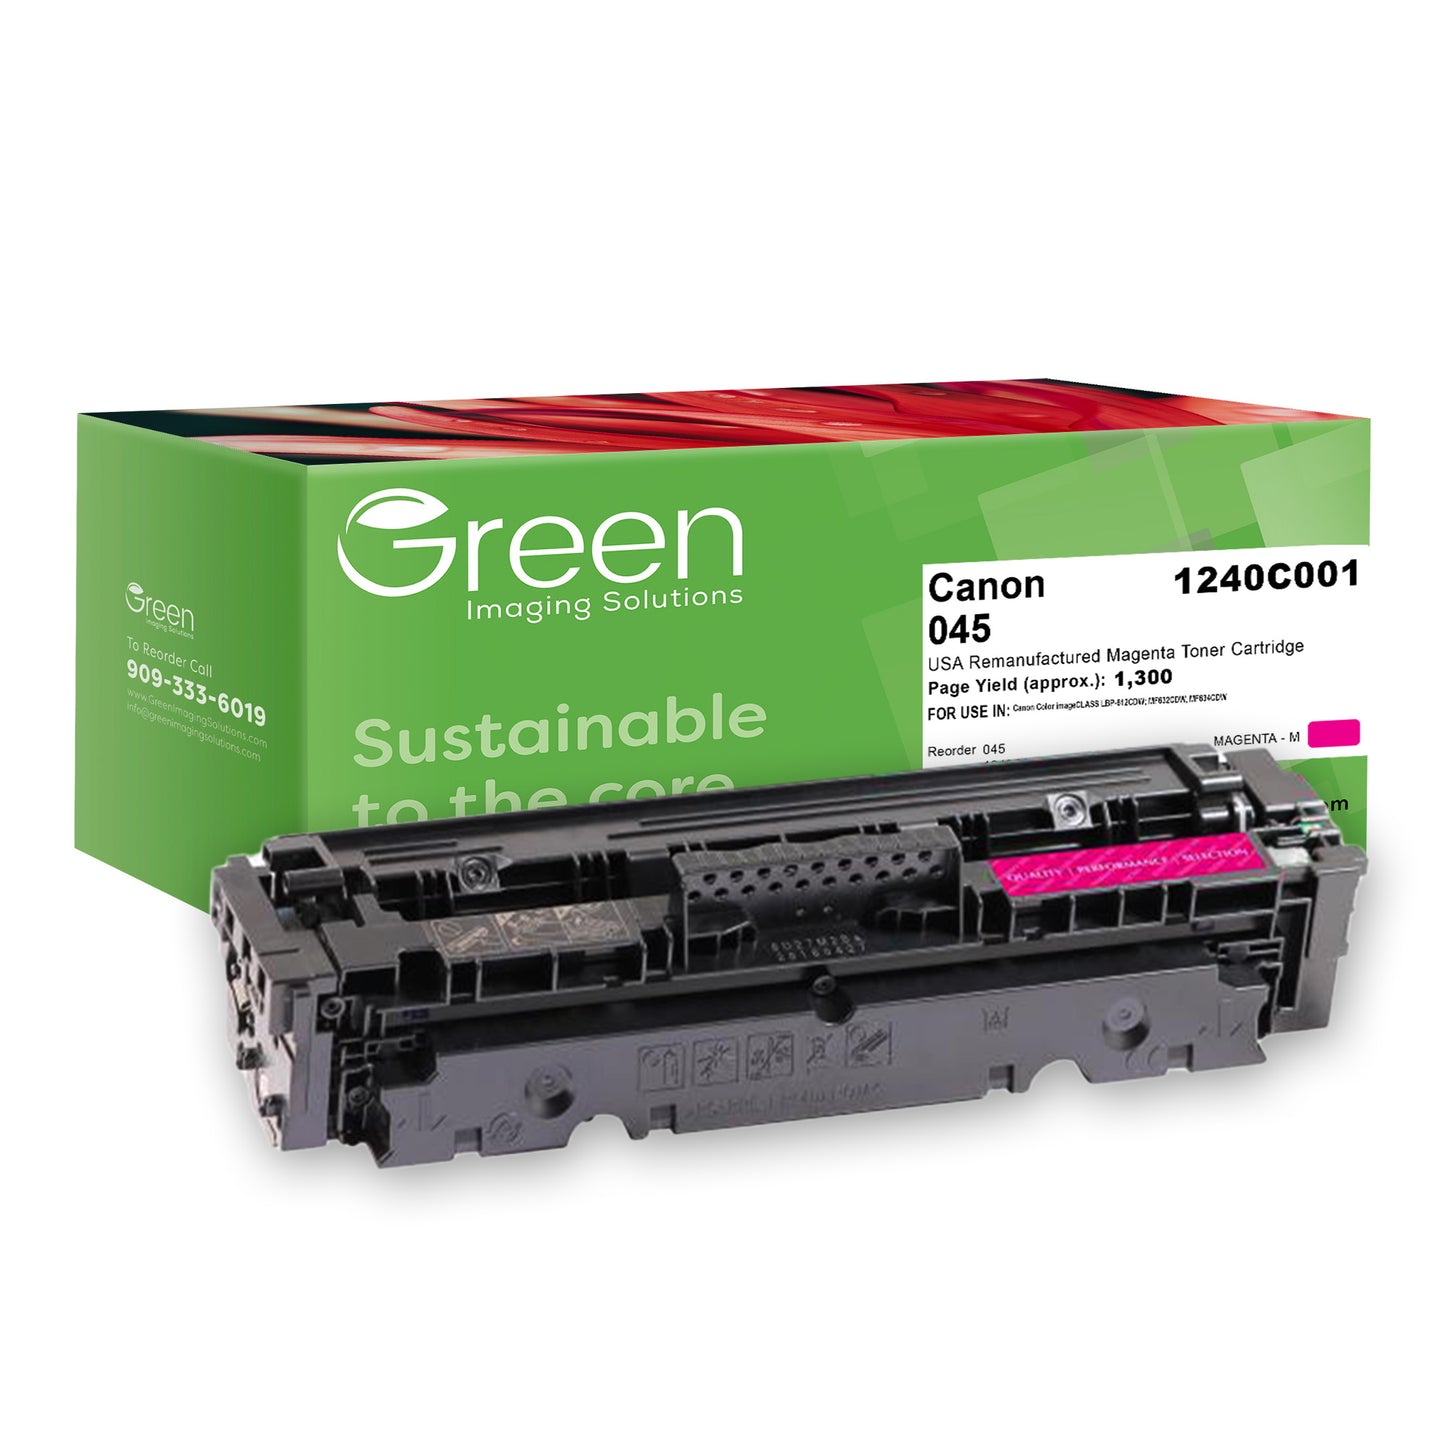 Green Imaging Solutions USA Remanufactured Magenta Toner Cartridge for Canon 1240C001 (045)